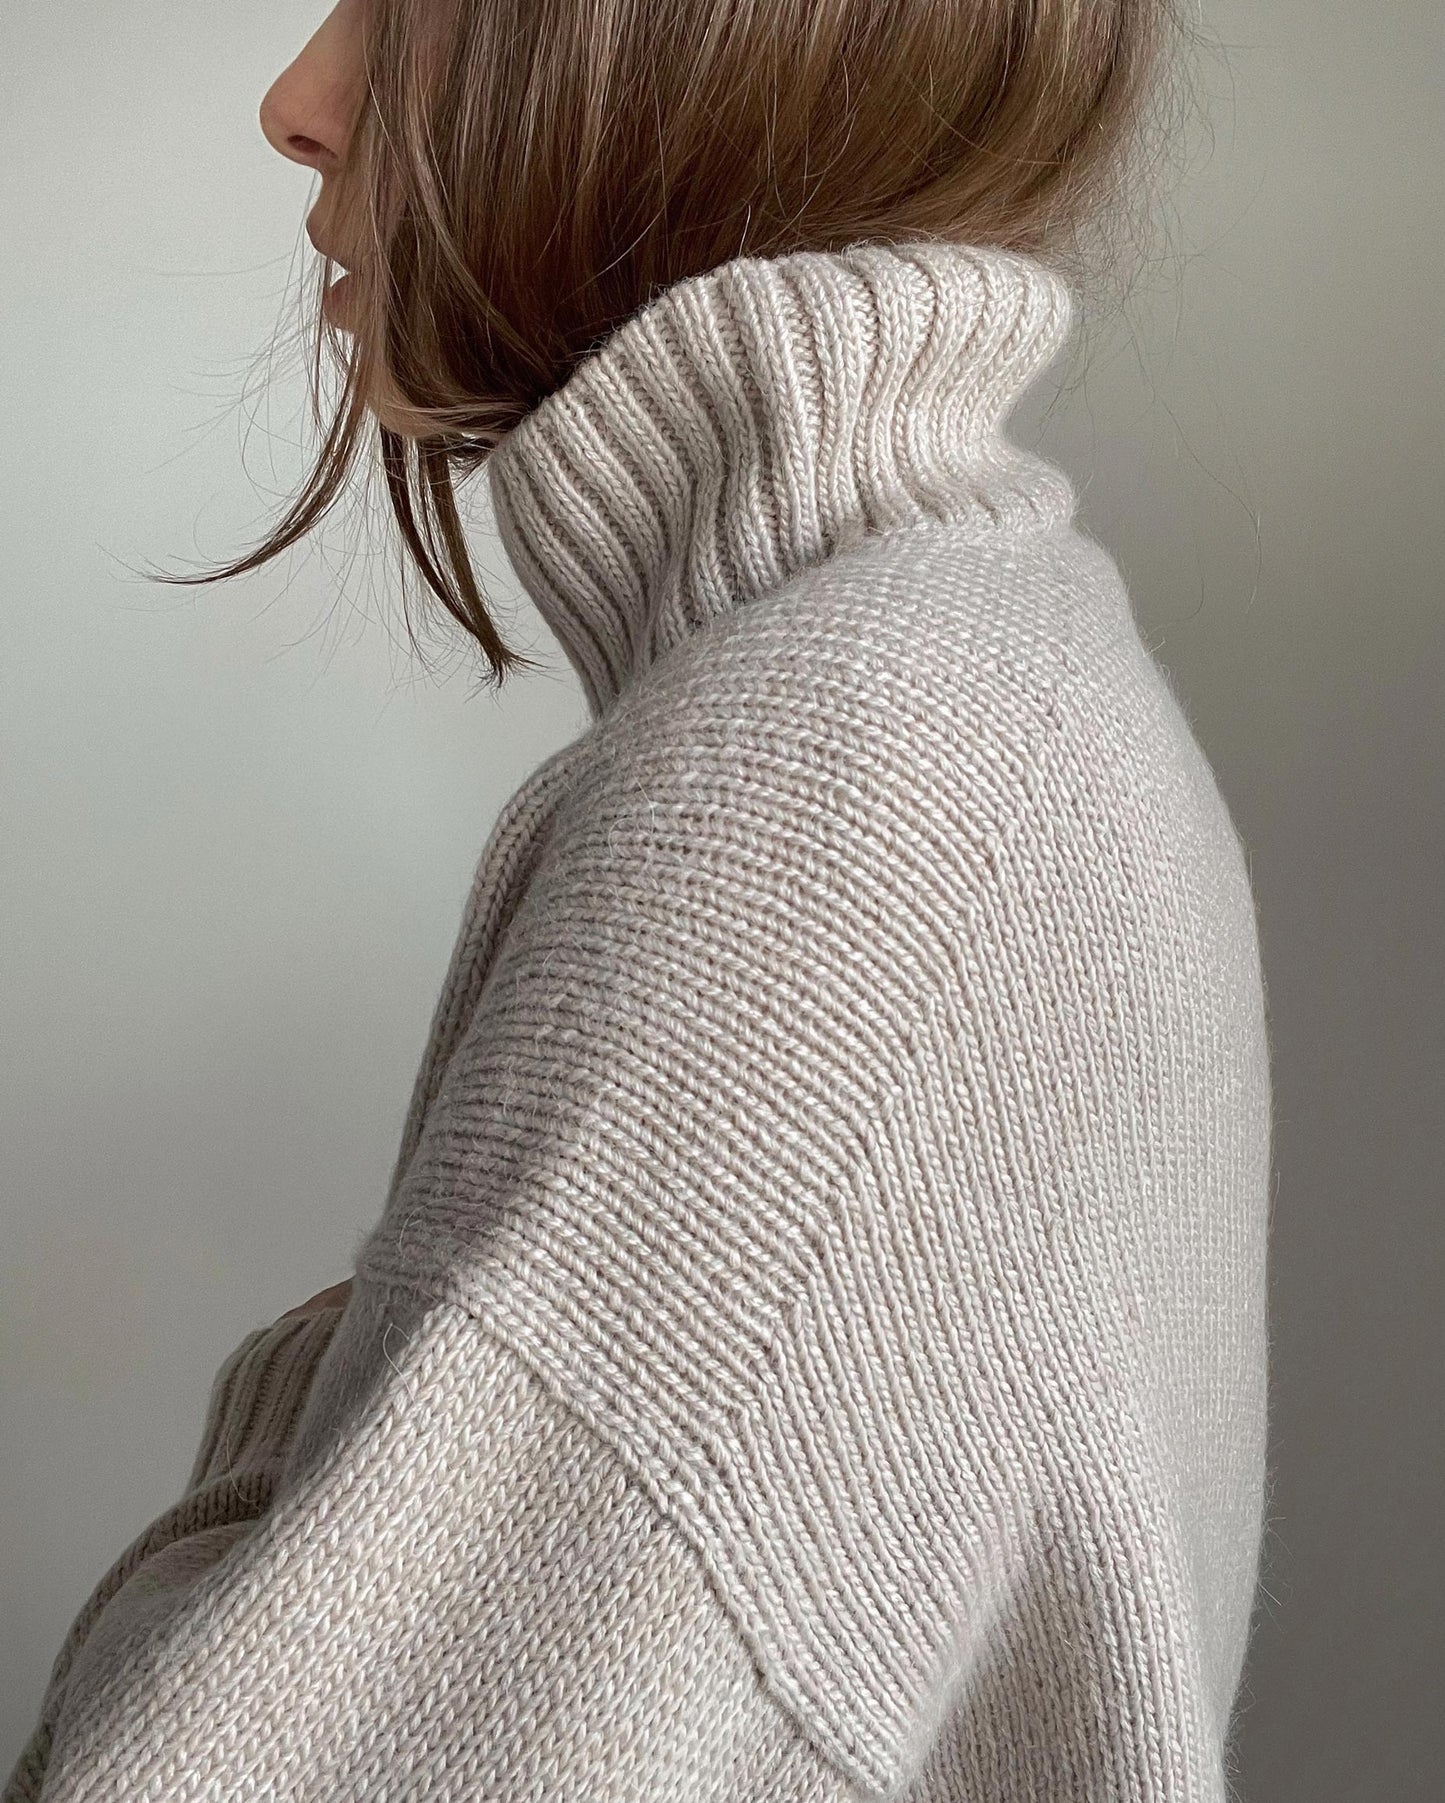 Cécile Top - Buy PDF knitting pattern online